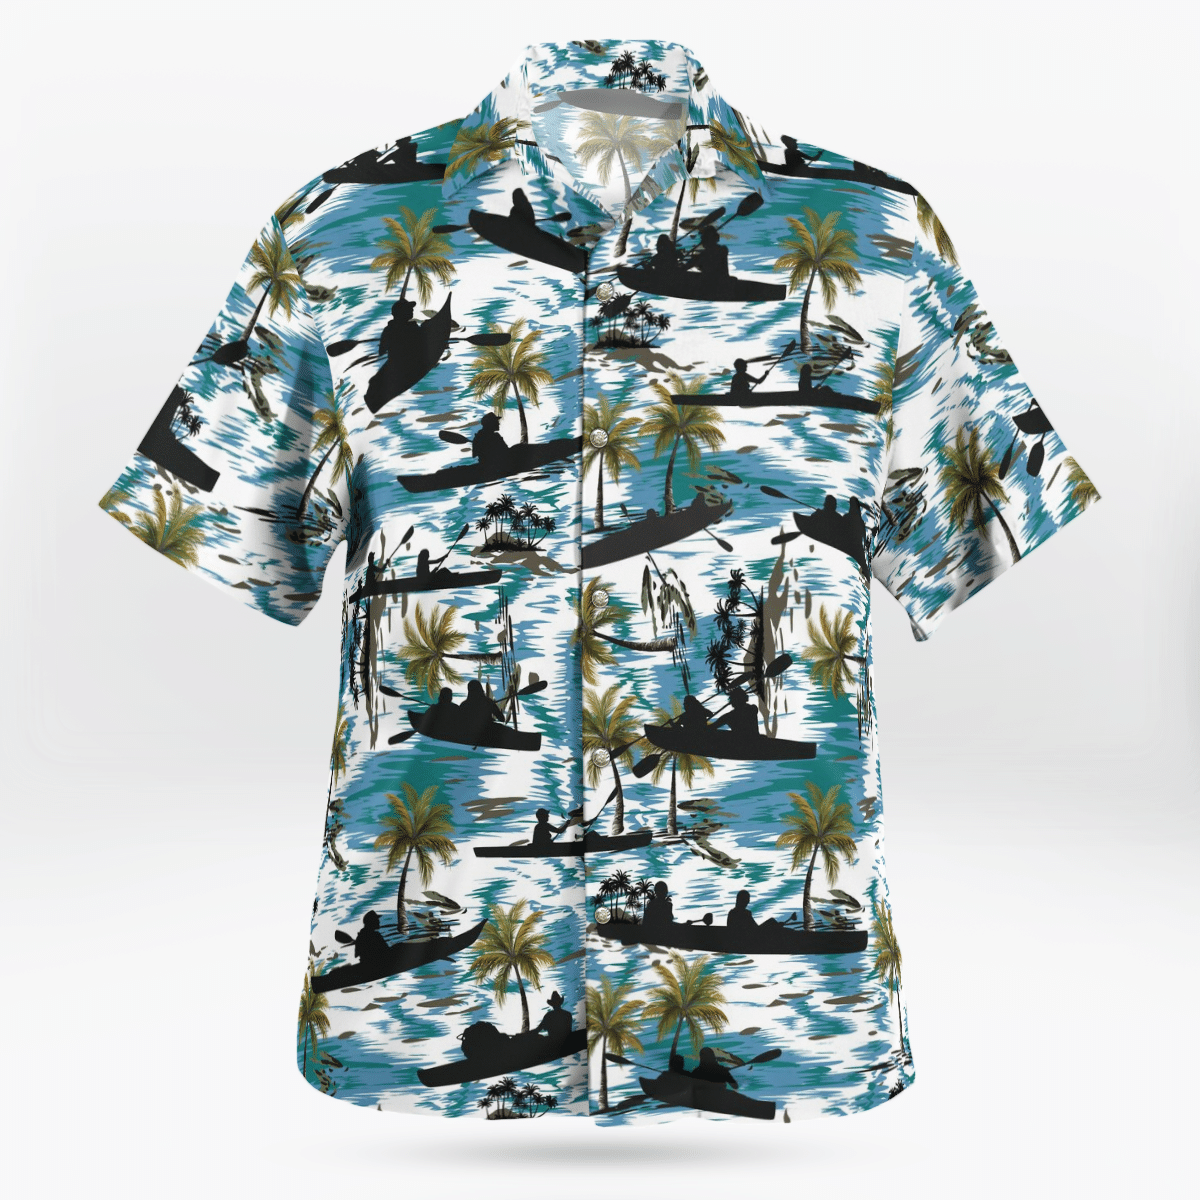 Hawaiian shirts never go out of style 95